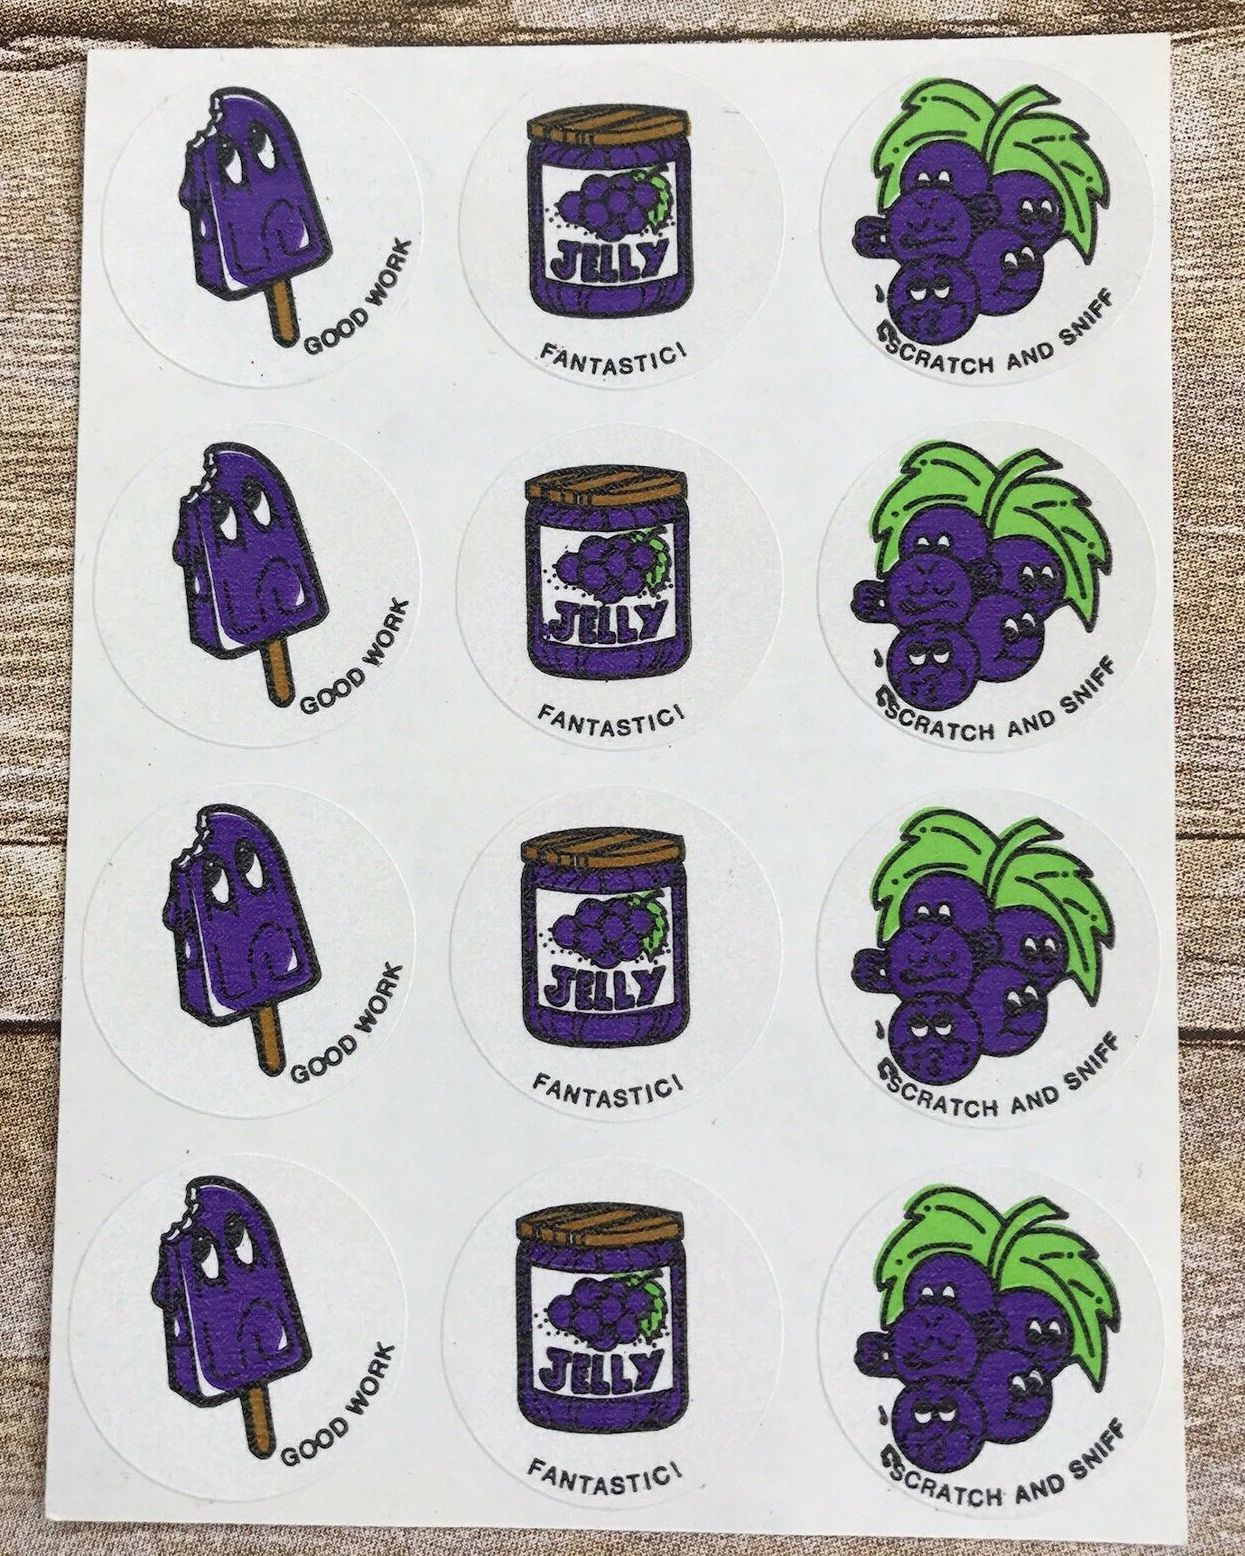 <p>Mr. Sketch didn't have an olfactory monopoly in the classroom. Most children of the '70s and '80s fondly remember <a href="https://clickamericana.com/eras/1970s/50-vintage-scratch-n-sniff-stickers-from-the-70s-80s">scratch 'n' sniff stickers</a> that teachers affixed to spelling tests, homework, and anything that showed a little extra effort. (Our personal favorite? The chocolate-scented "Scooper Dooper" ice-cream cone.) While today's teachers have mostly moved on to foil stars or written affirmations, scratch 'n' sniffs are still on the market. If you want to go old school, <a href="https://www.etsy.com/listing/249947910/sale-vintage-trend-matte-scratch-sniff">check out Etsy</a> or eBay.</p>